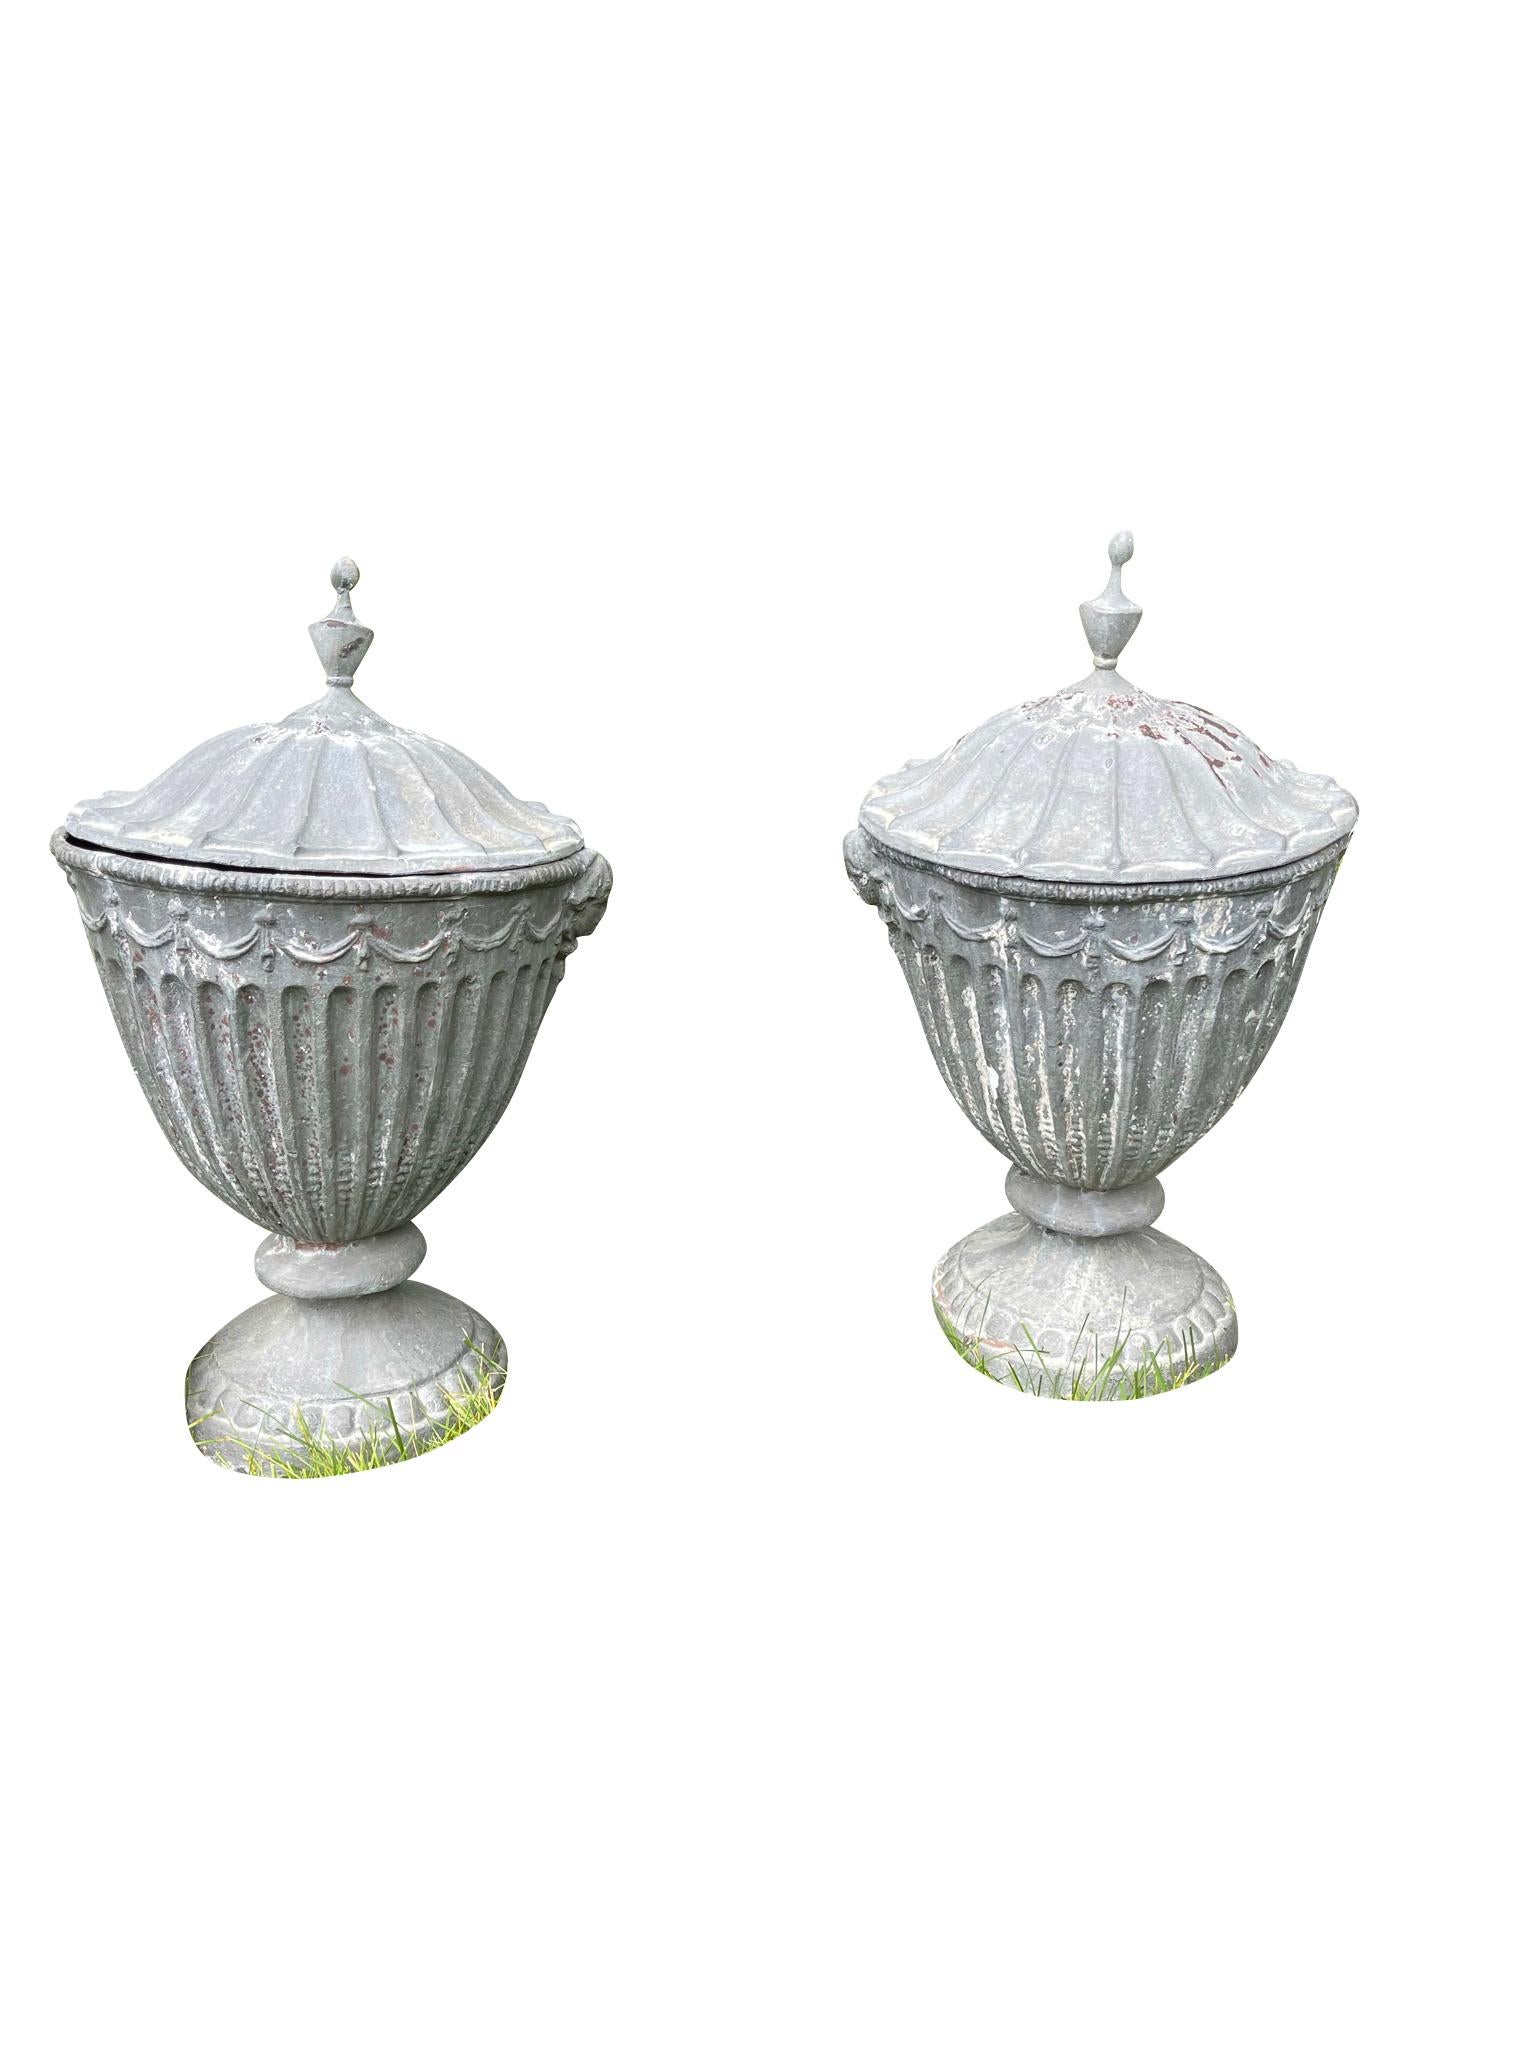 19th Century English Classical Pair of Lead Garden Urns with Covers Grey  For Sale 4